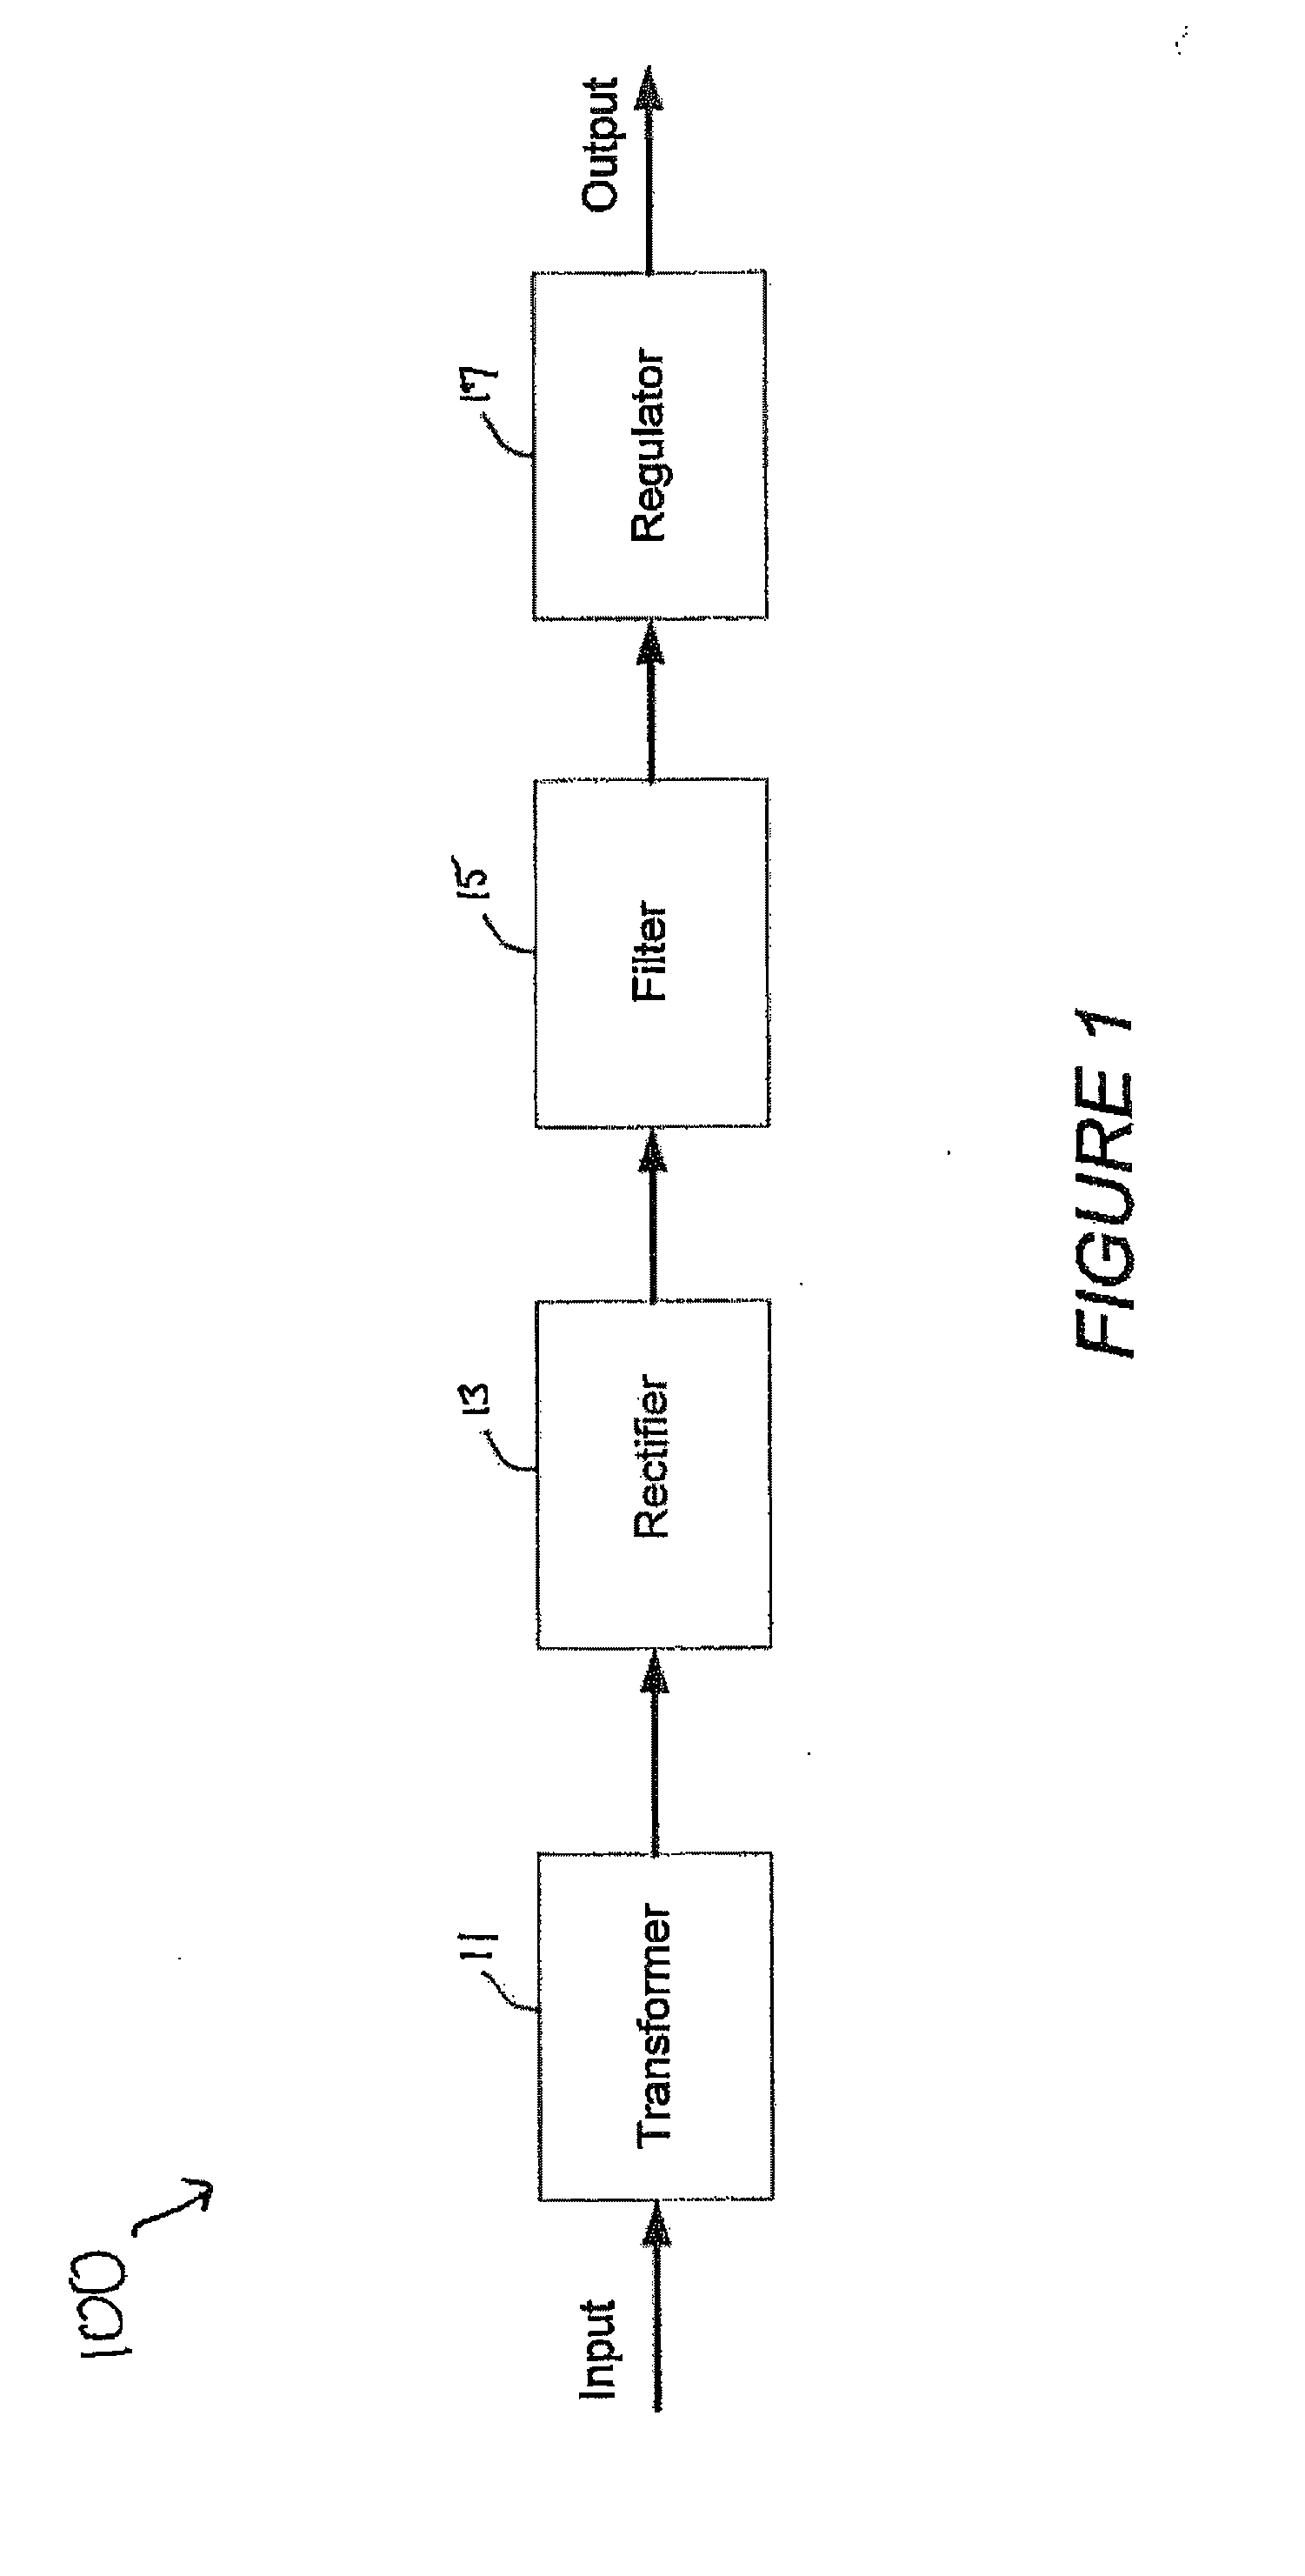 Apparatus and method for providing a modular power supply with multiple adjustable output voltages